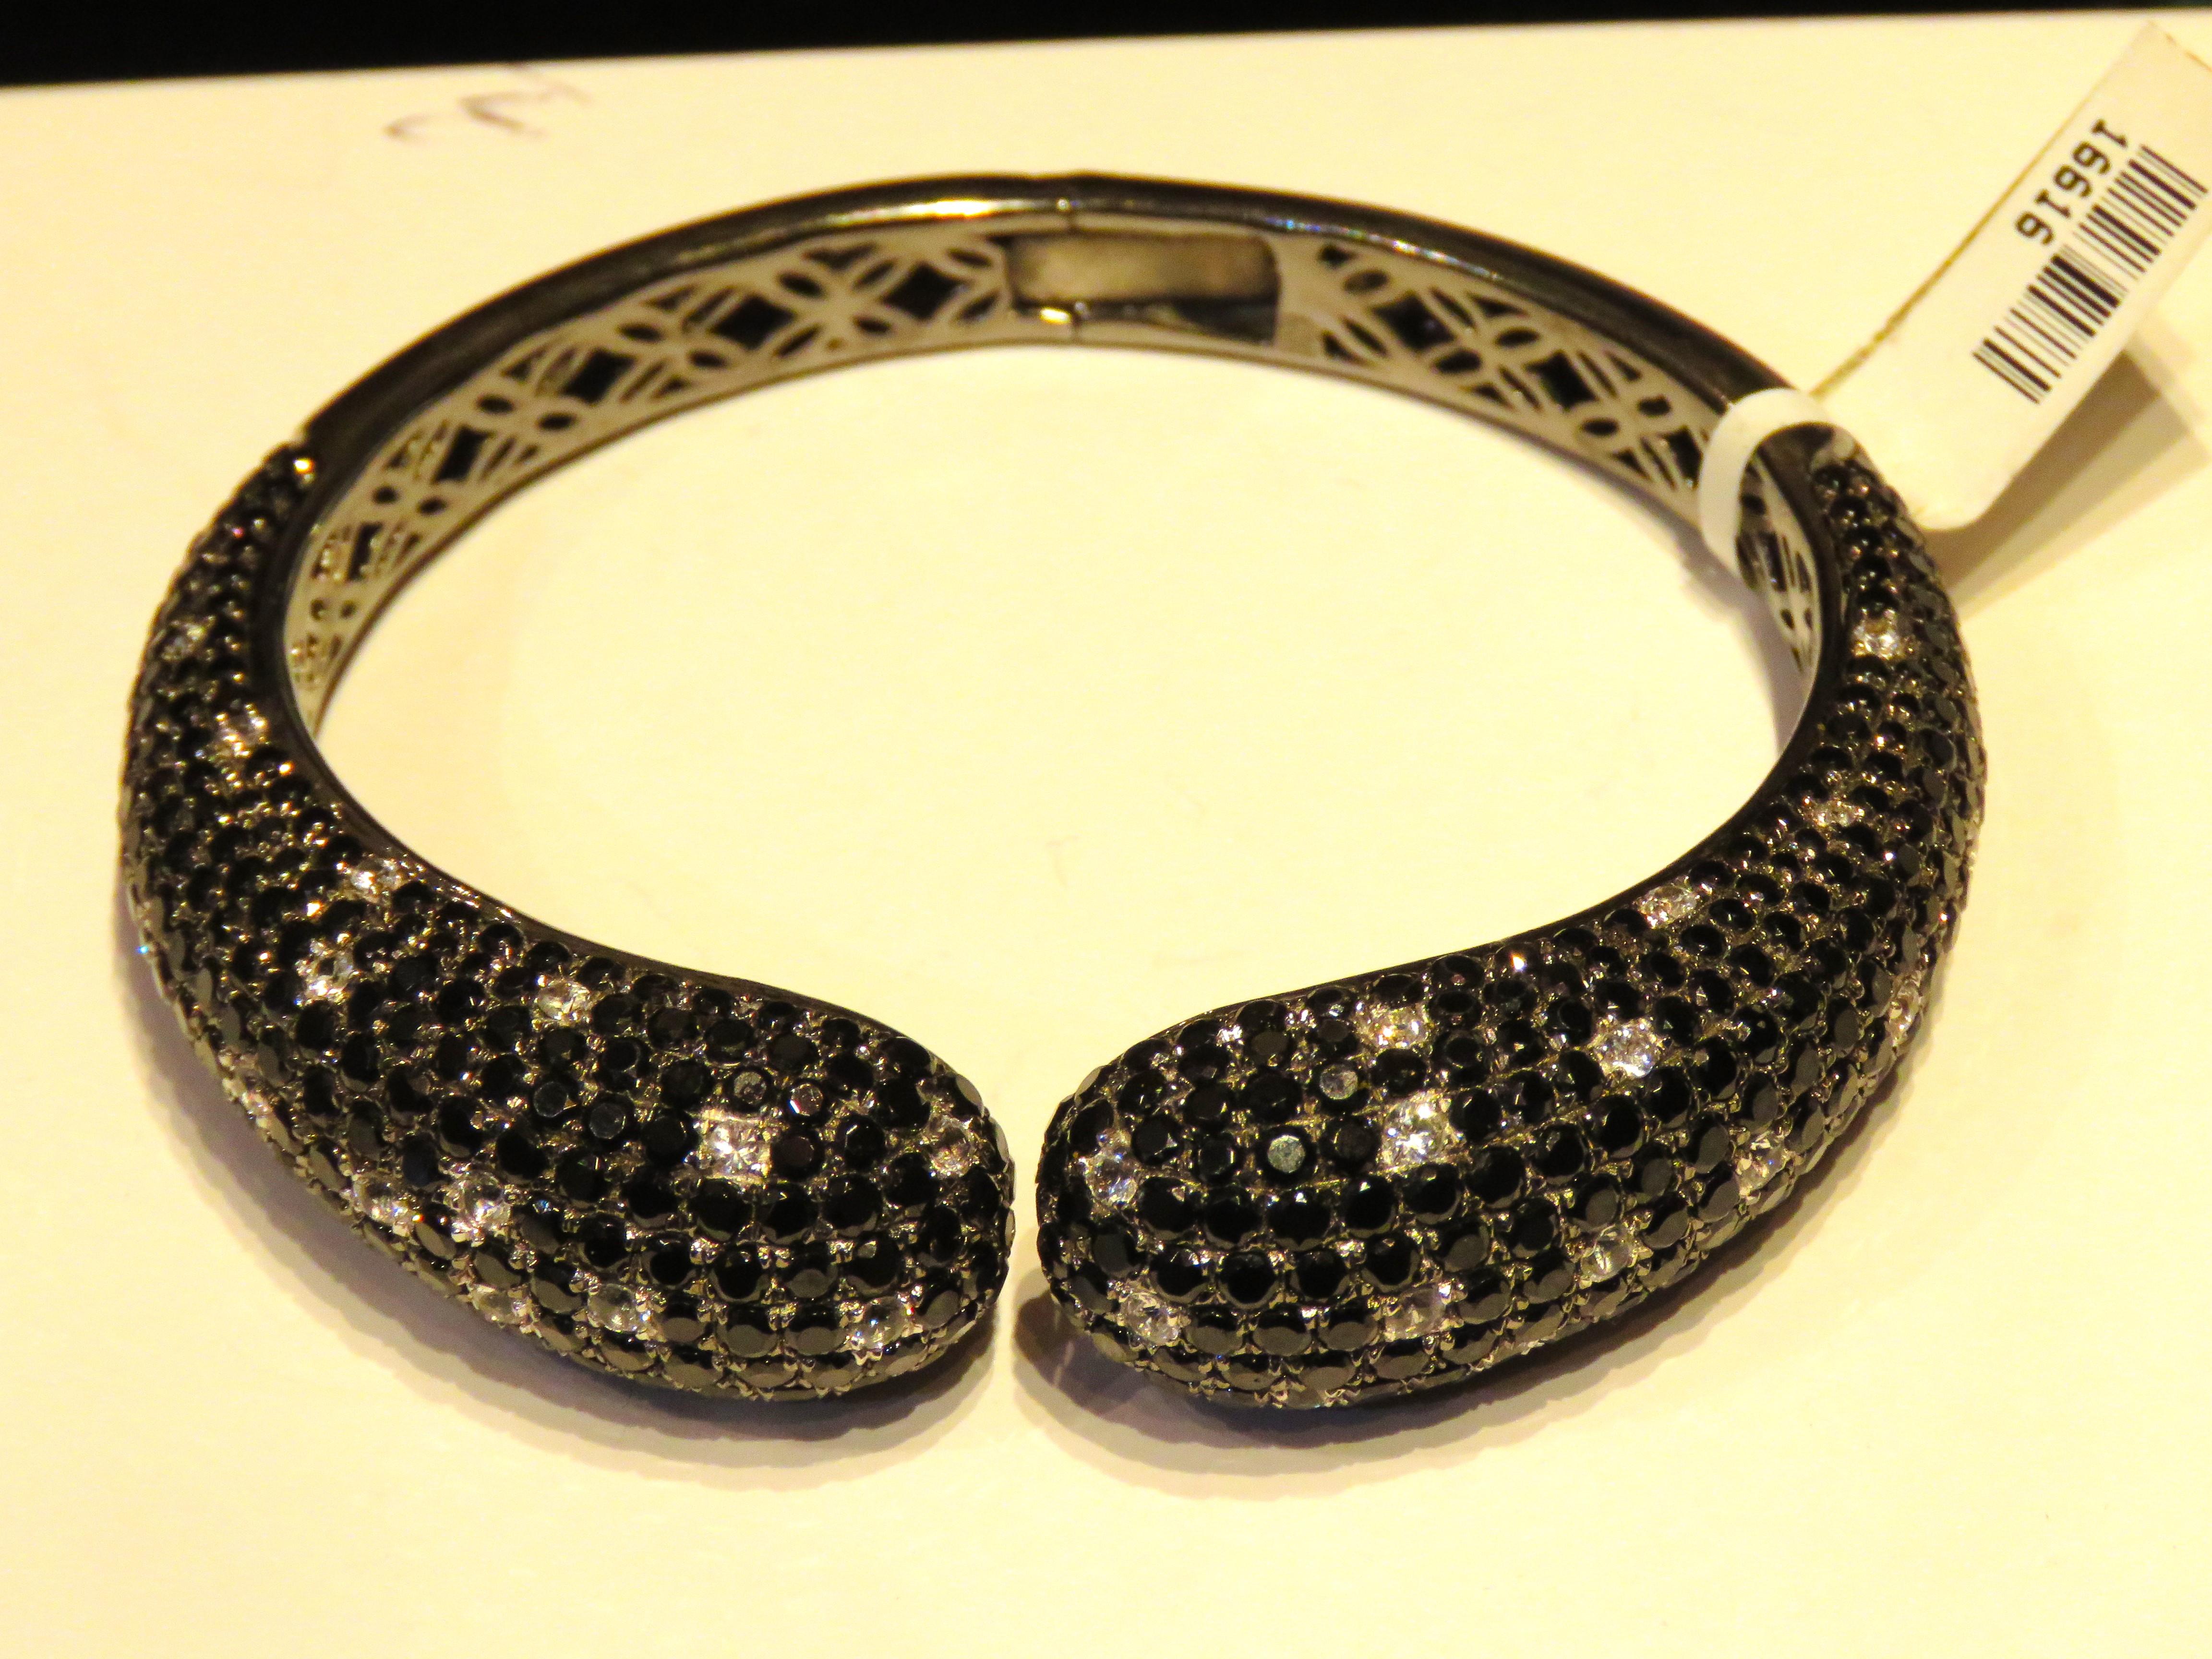 The Following Item we are offering is this Rare Magnificent FANCY BLACK SPINEL WHITE SAPPHIRE STERLING SILVER CUFF BANGLE BRACELET. T.C.W. OVER 22CTS!!! This Magnificent Bangle is a Rare Sample Piece that were sold in select Five Star Hotels and